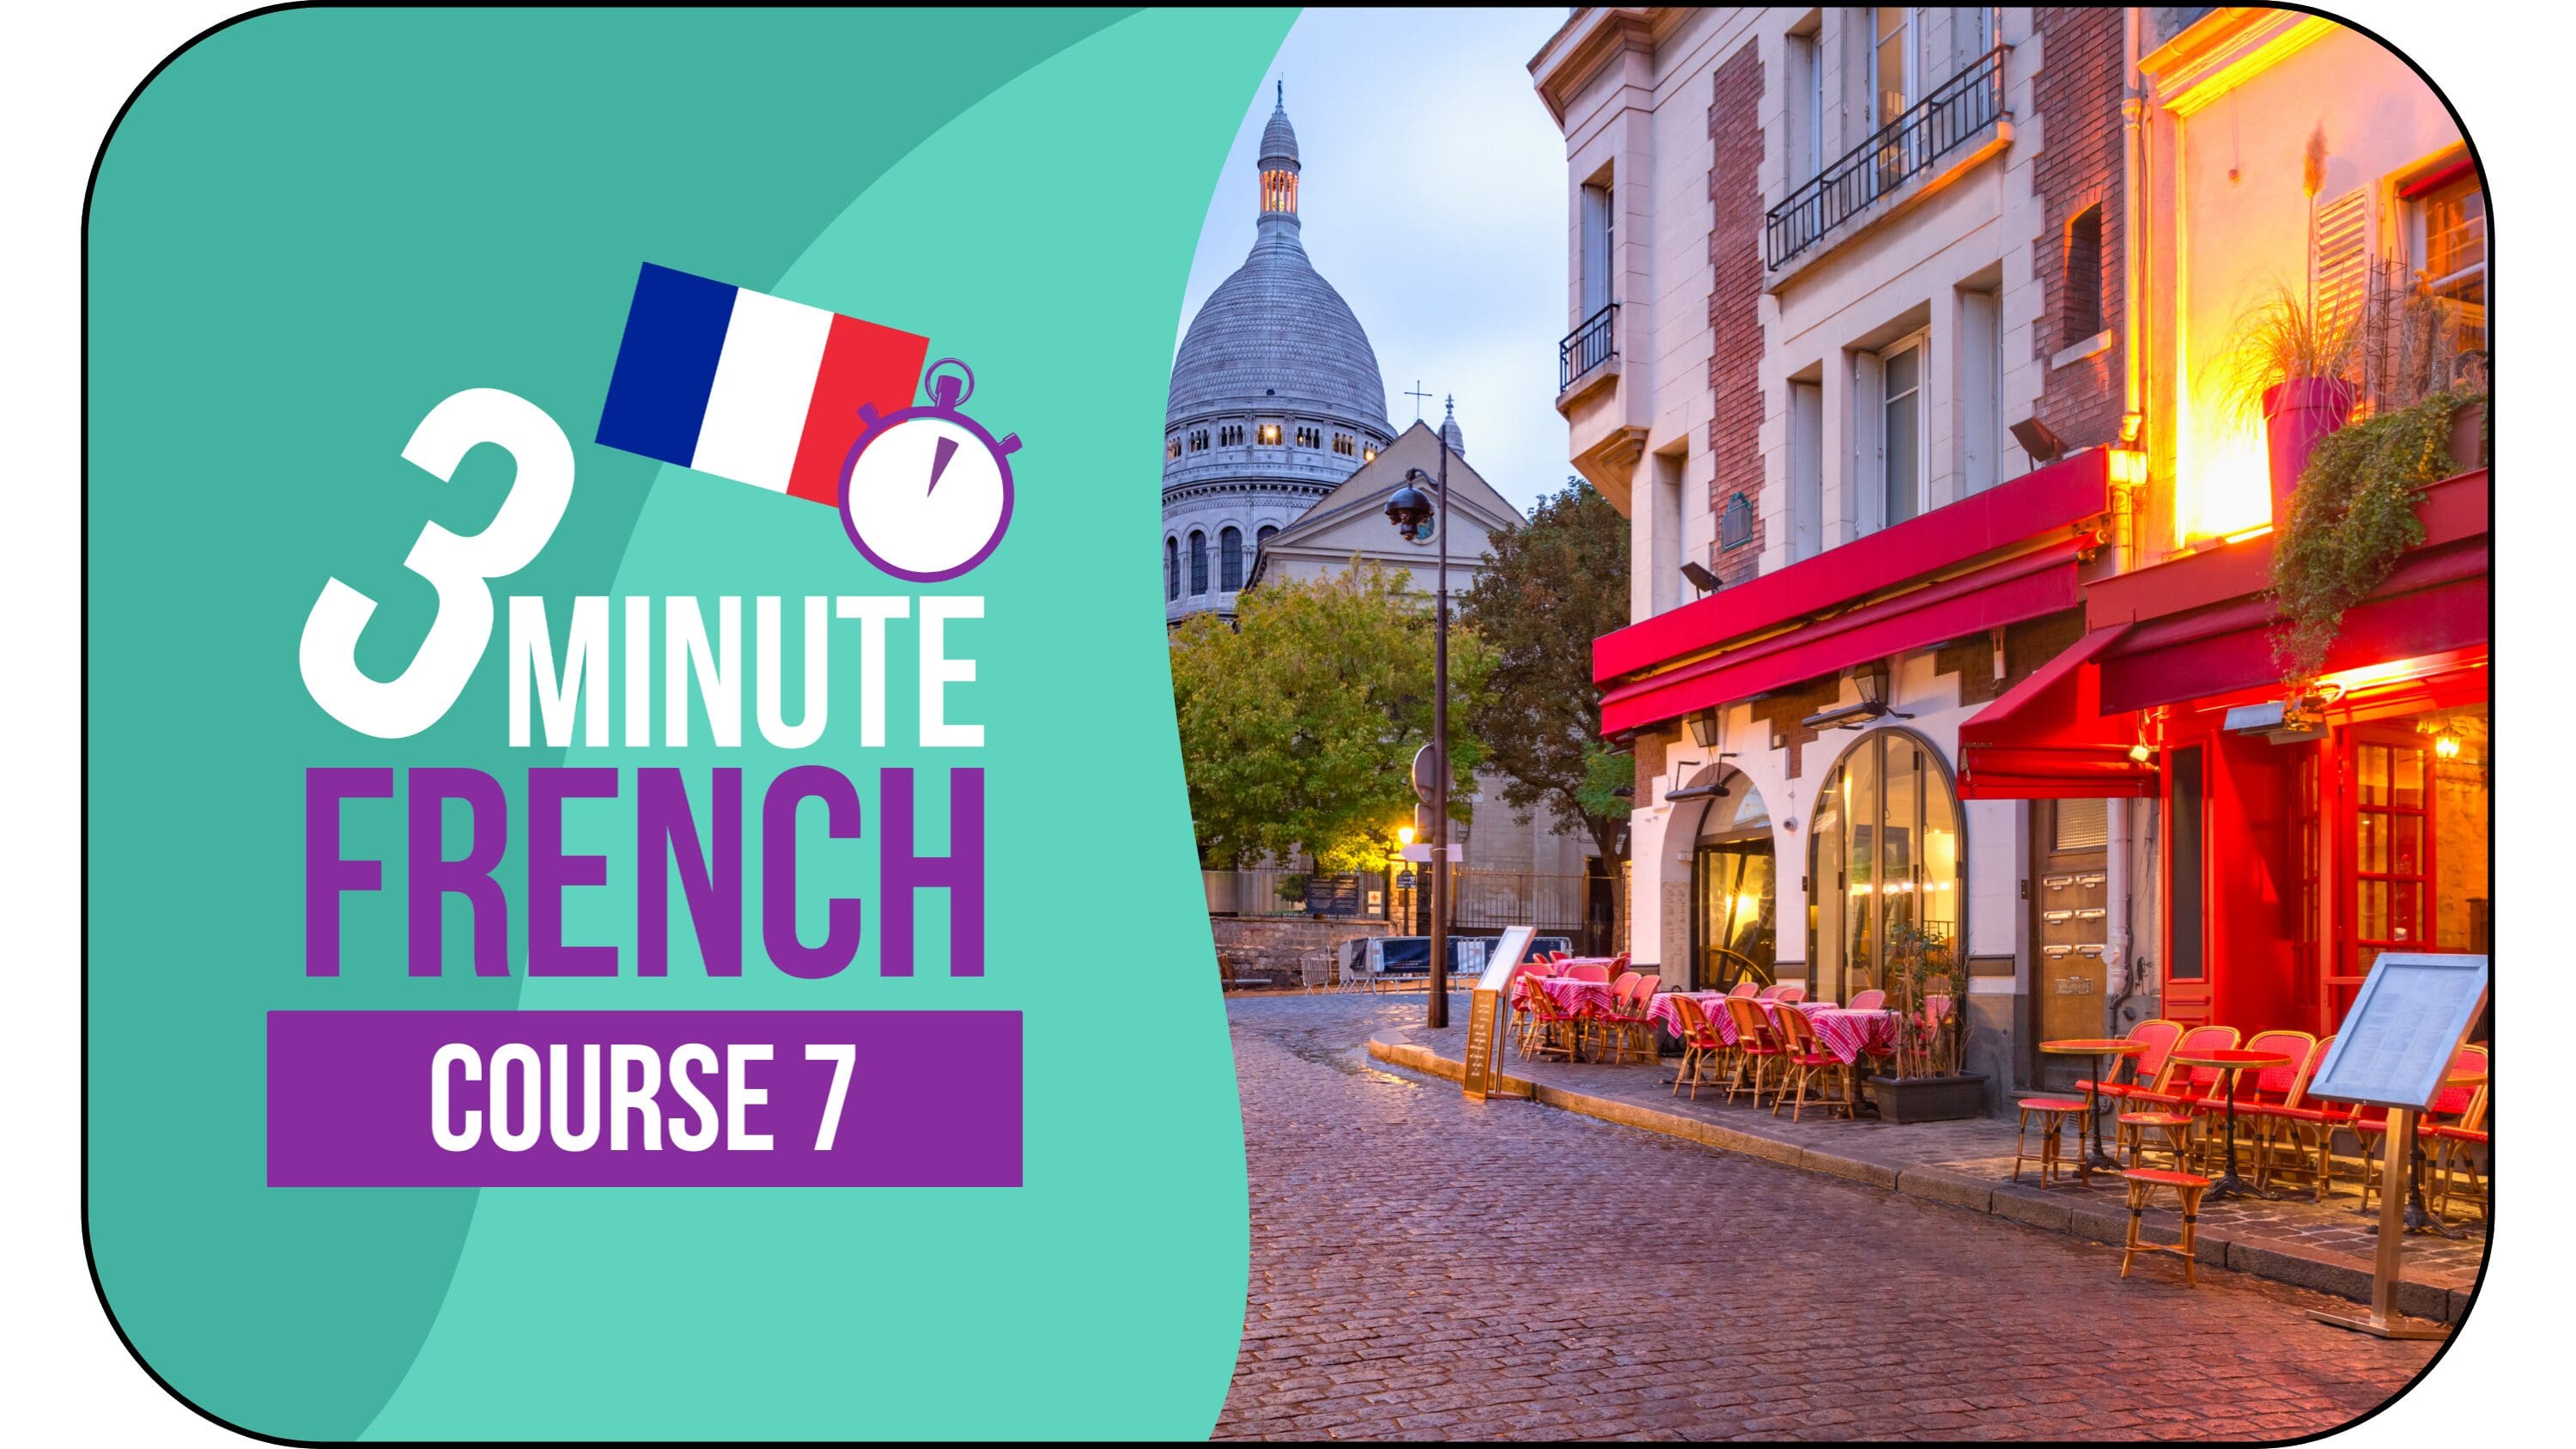 3 Minute French - Course 7